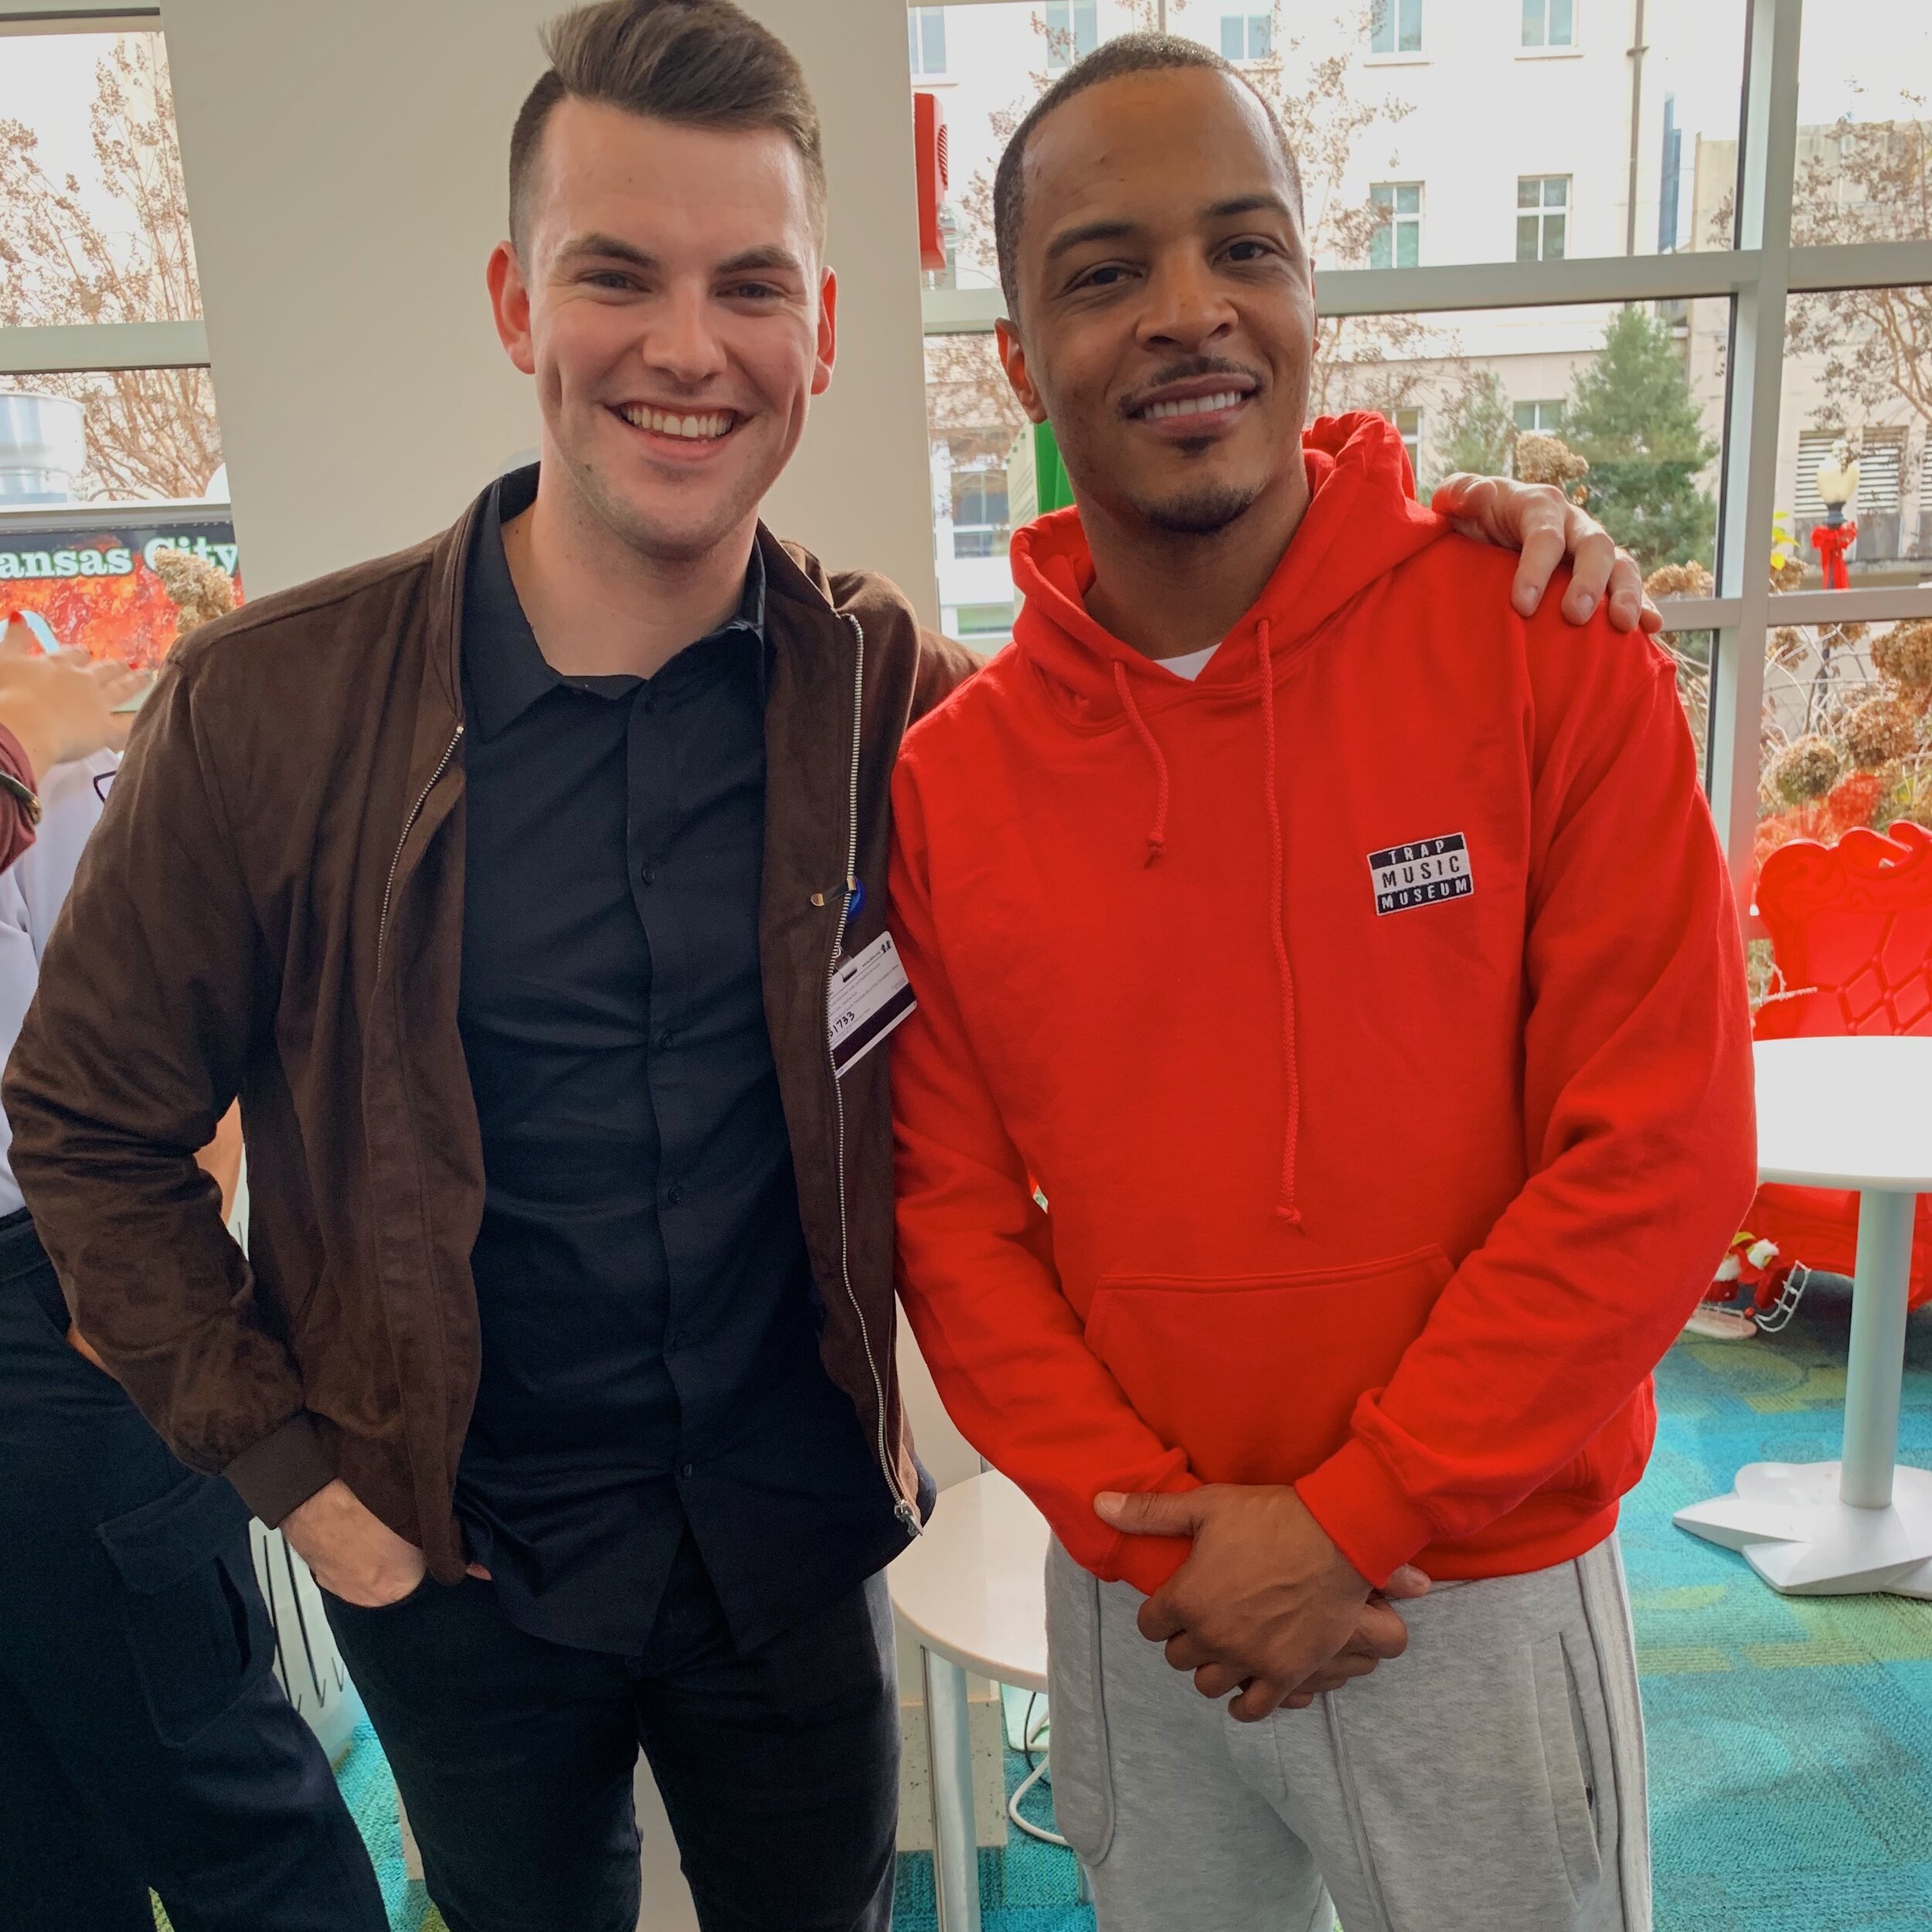 INTERVIEW WITH T.I.